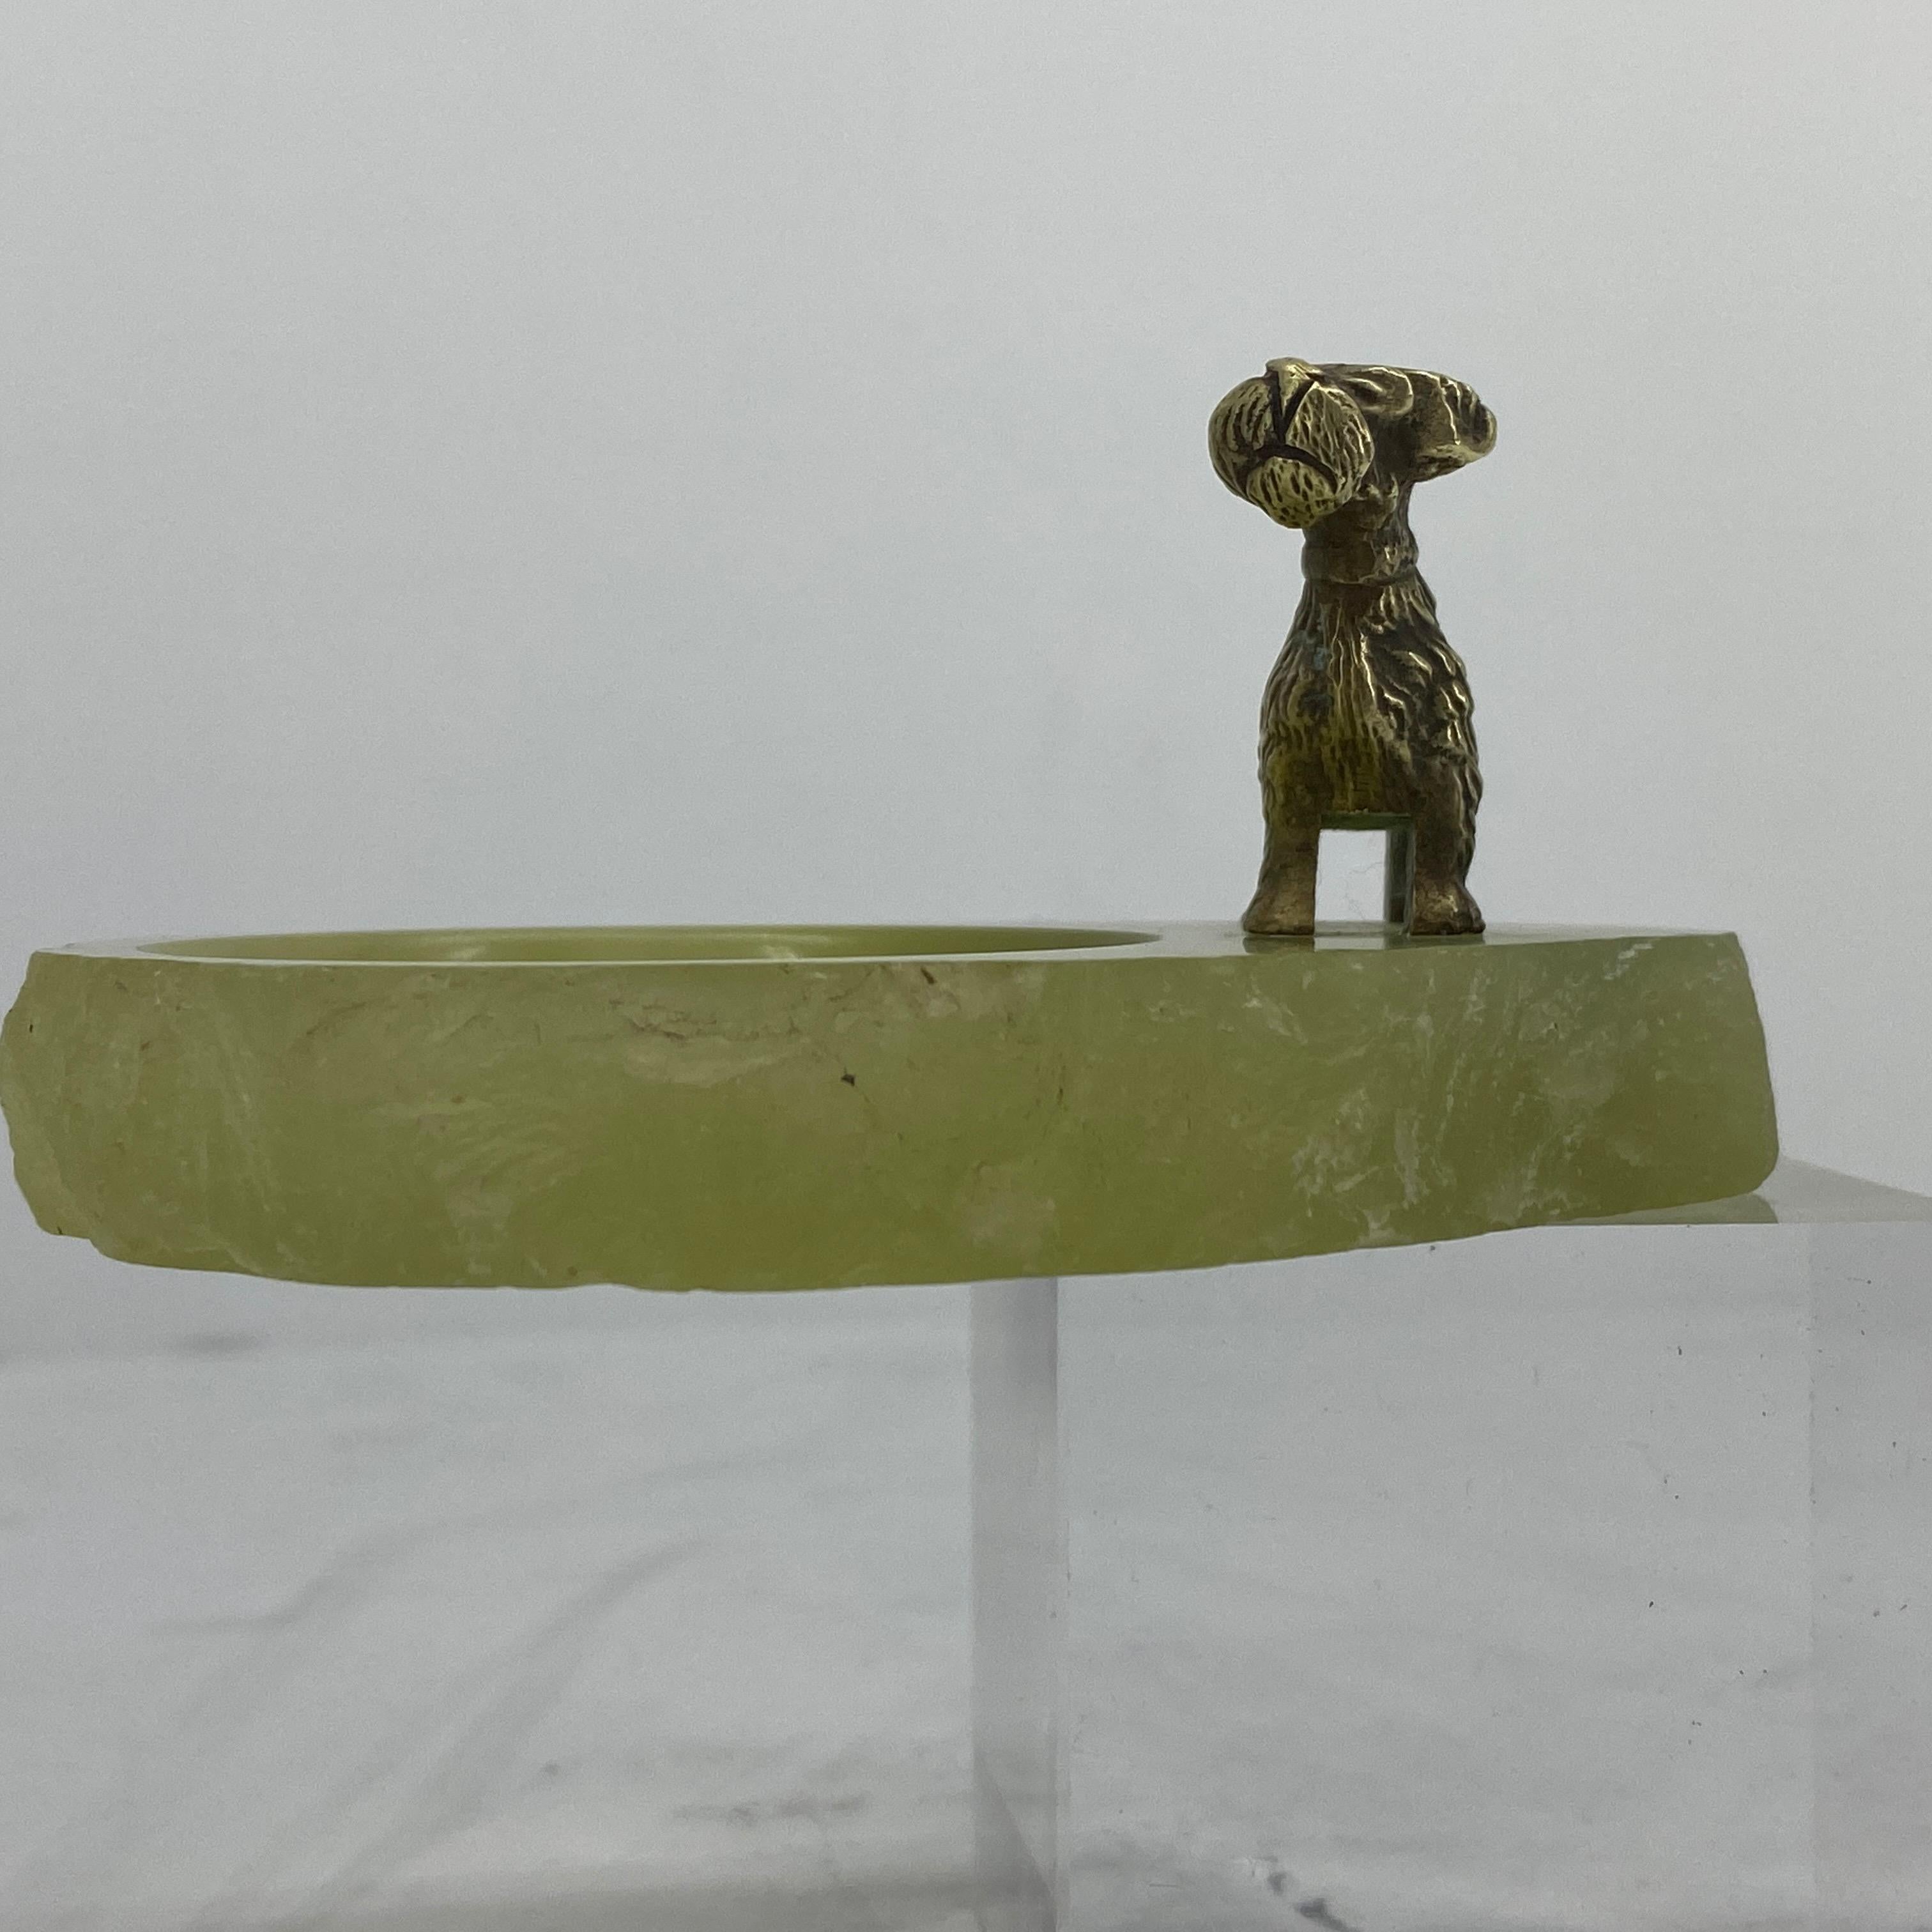 Pistachio Green Onyx and Bronze Terrier Ashtray or Jewelry Tray 1